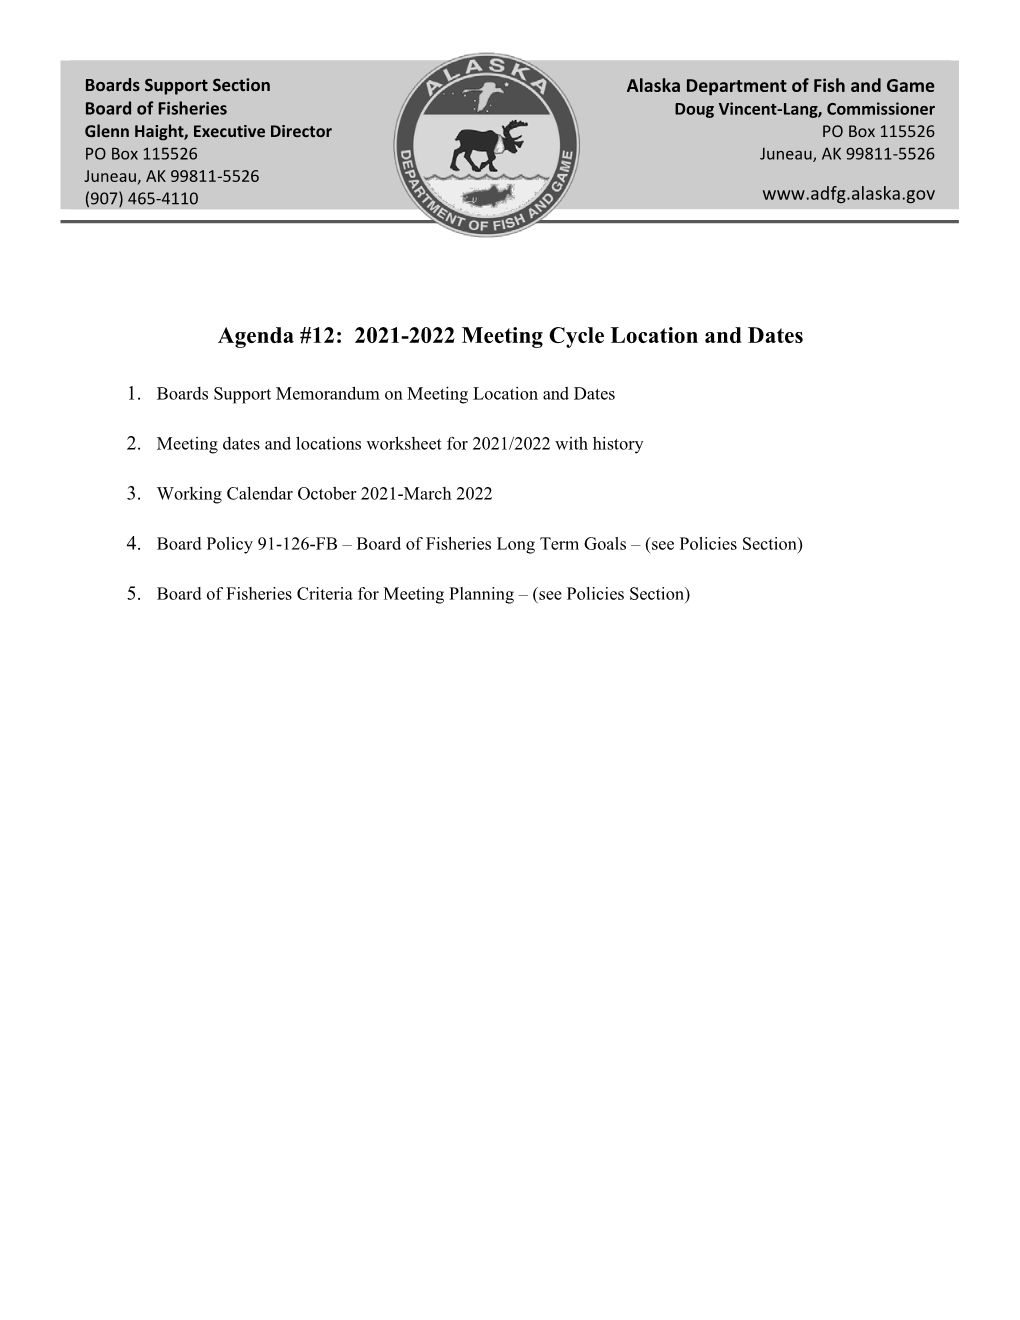 2021-2022 Meeting Cycle Location and Dates